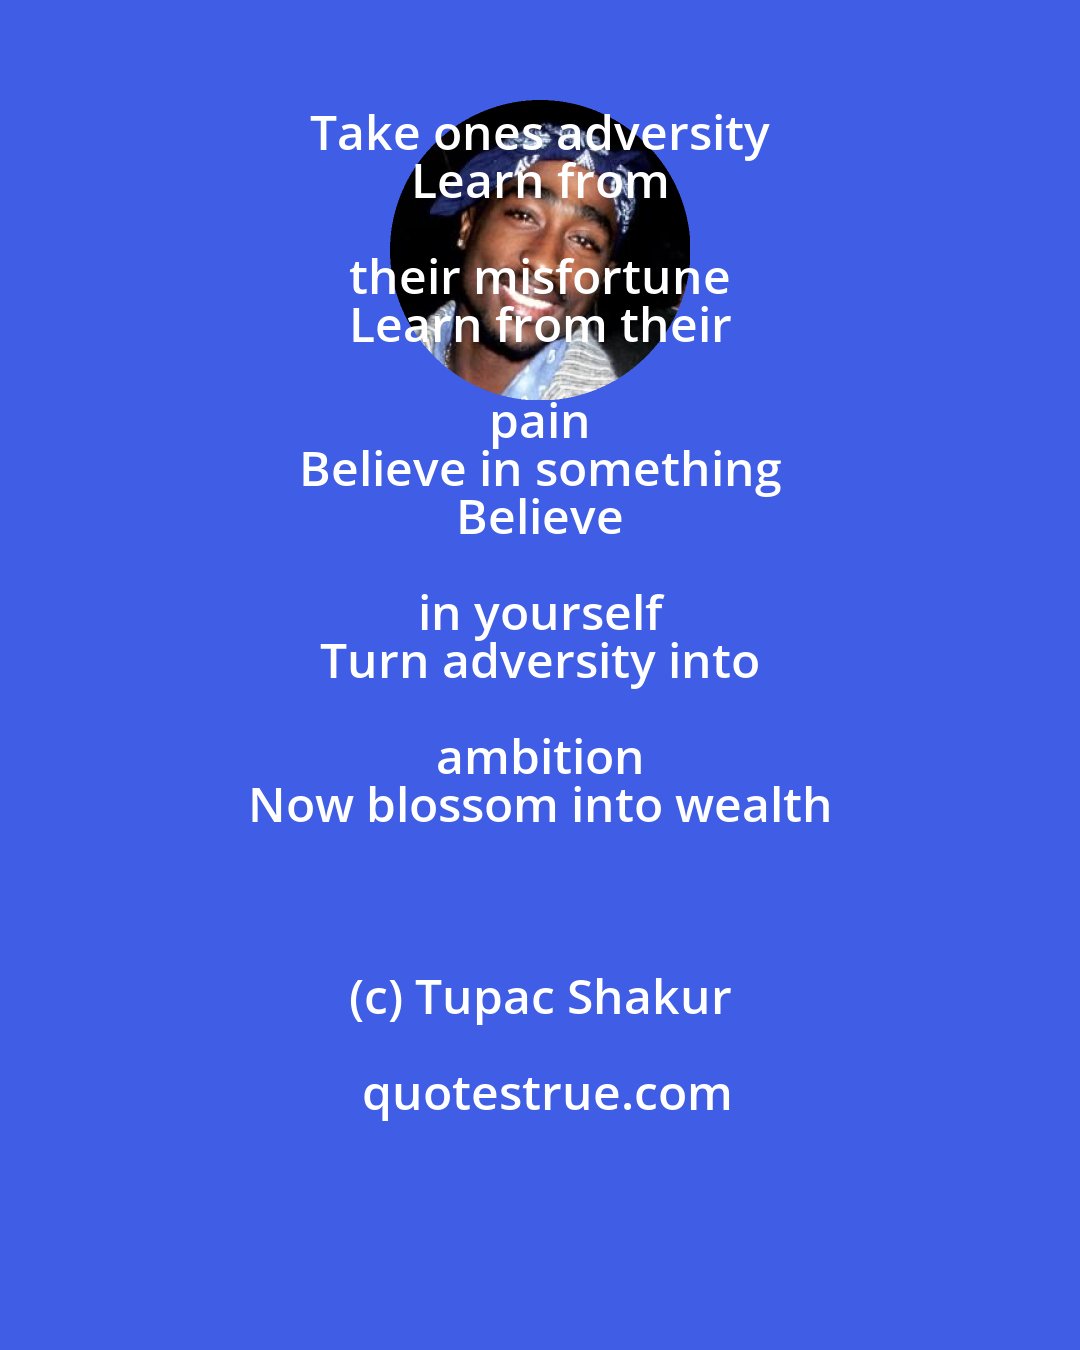 Tupac Shakur: Take ones adversity 
 Learn from their misfortune 
 Learn from their pain 
 Believe in something 
 Believe in yourself 
 Turn adversity into ambition 
 Now blossom into wealth